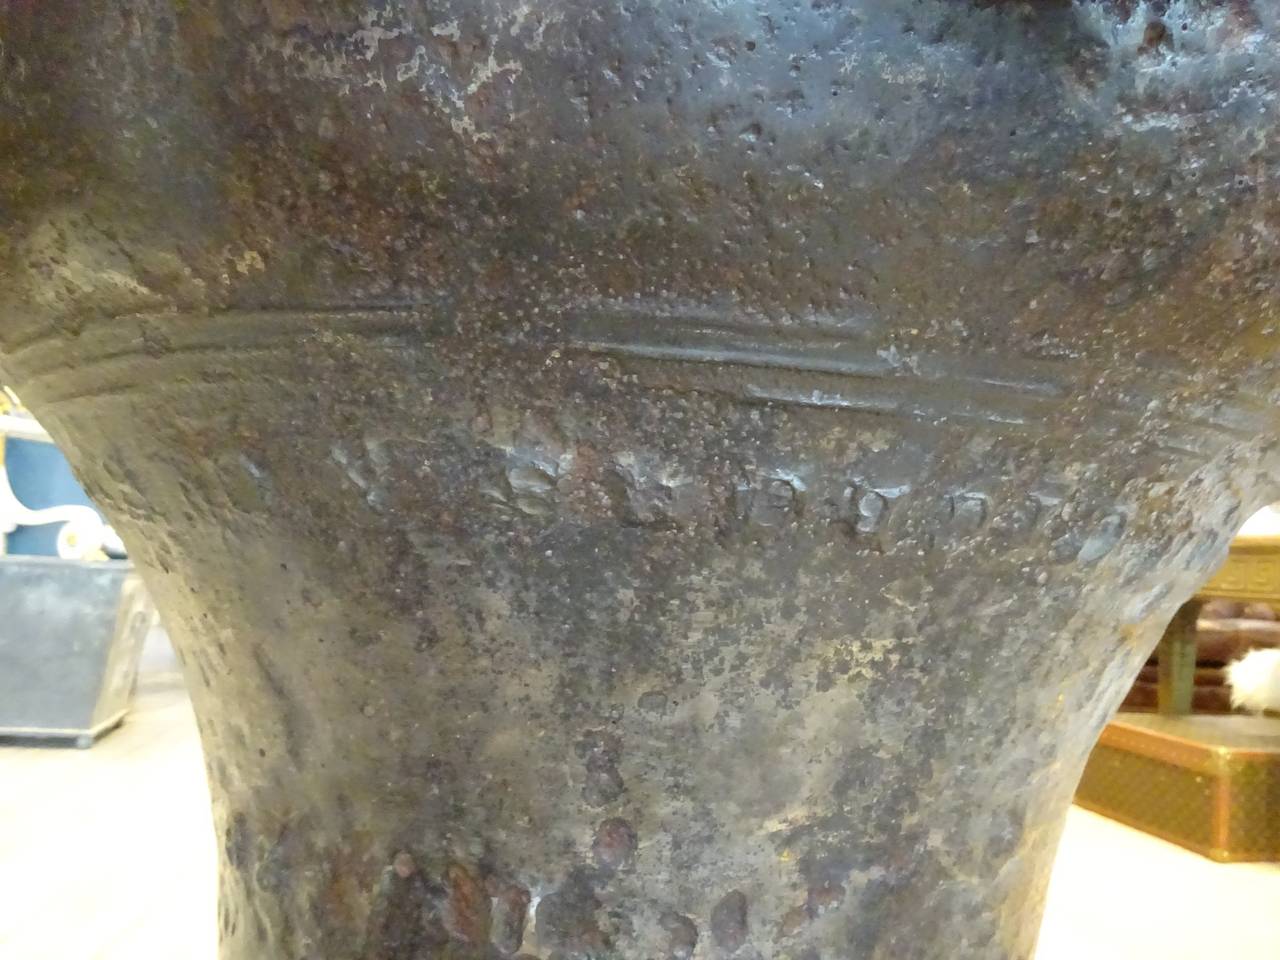 Large French 18th century or older bronze bell, mounted on a later bronze and marble square plinth. Can be used as a table base or planter, decorated with now illegible rows of relief script. Weighs about 300lbs.